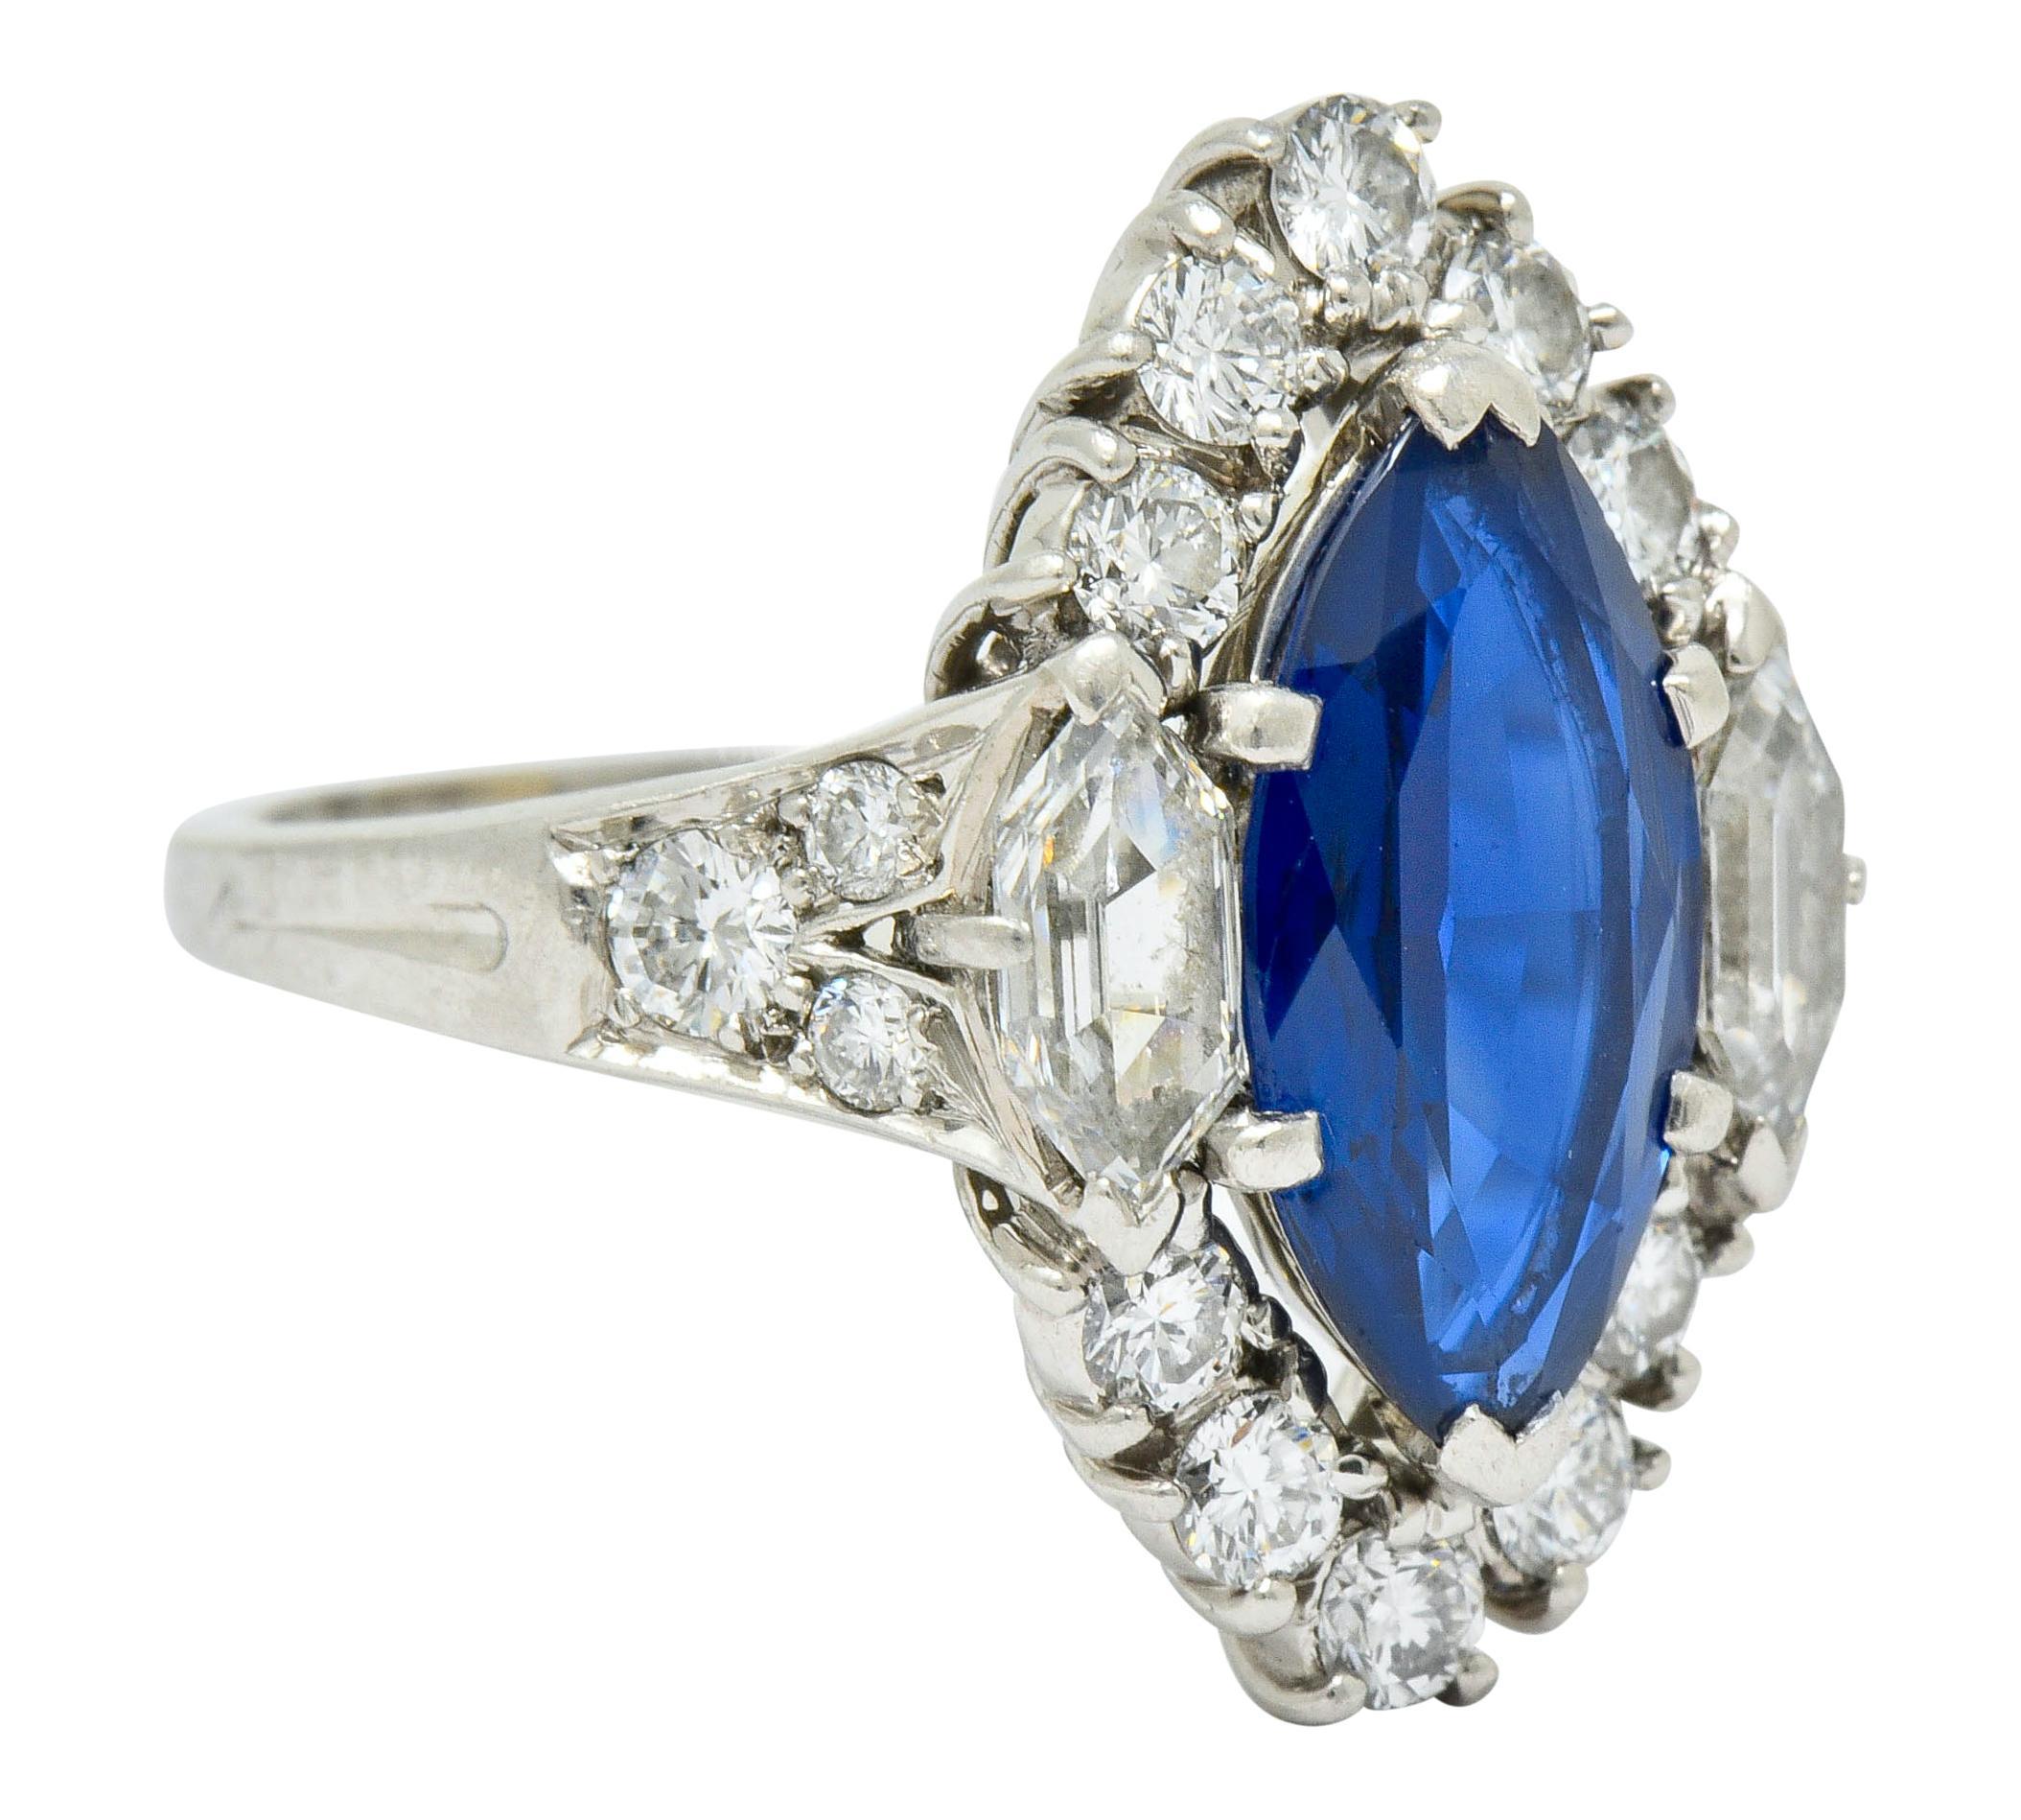 Centering a marquis mixed cut sapphire weighing approximately 2.00 carats

Transparent and deeply royal blue with no indications of heat

Flanked by two hexagonal step cut diamonds weighing in total approximately 0.50 carat; G/H color with VVS